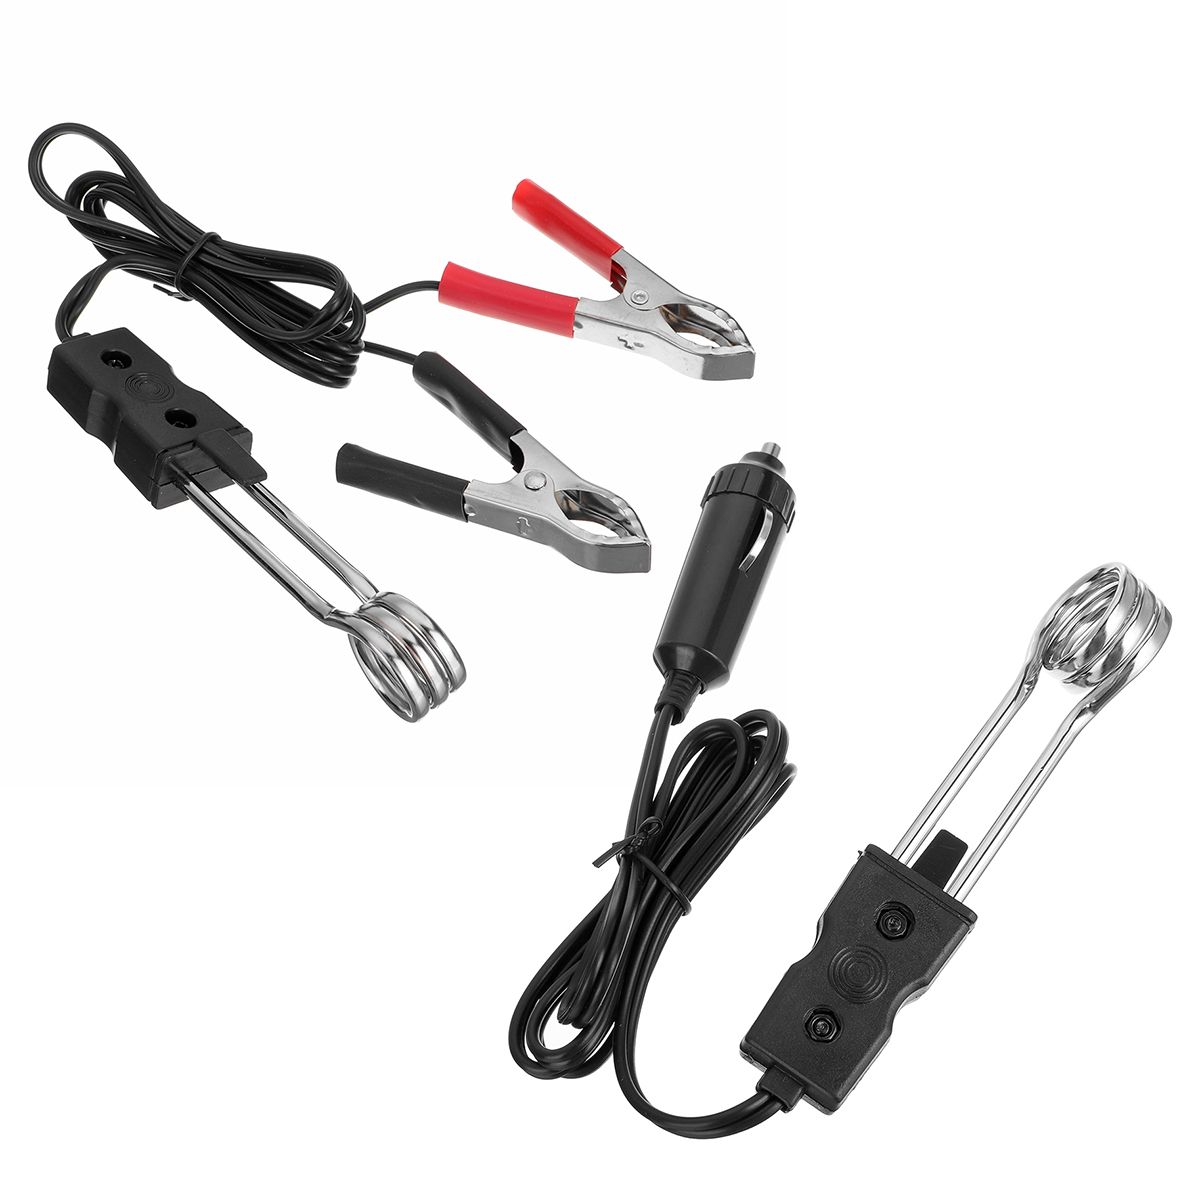 12V24V-140W-Portable-Electric-Car-Boiled-Water-Tea-Immersion-Heater-For-Camping-Picnic-Car-Accessori-1710529